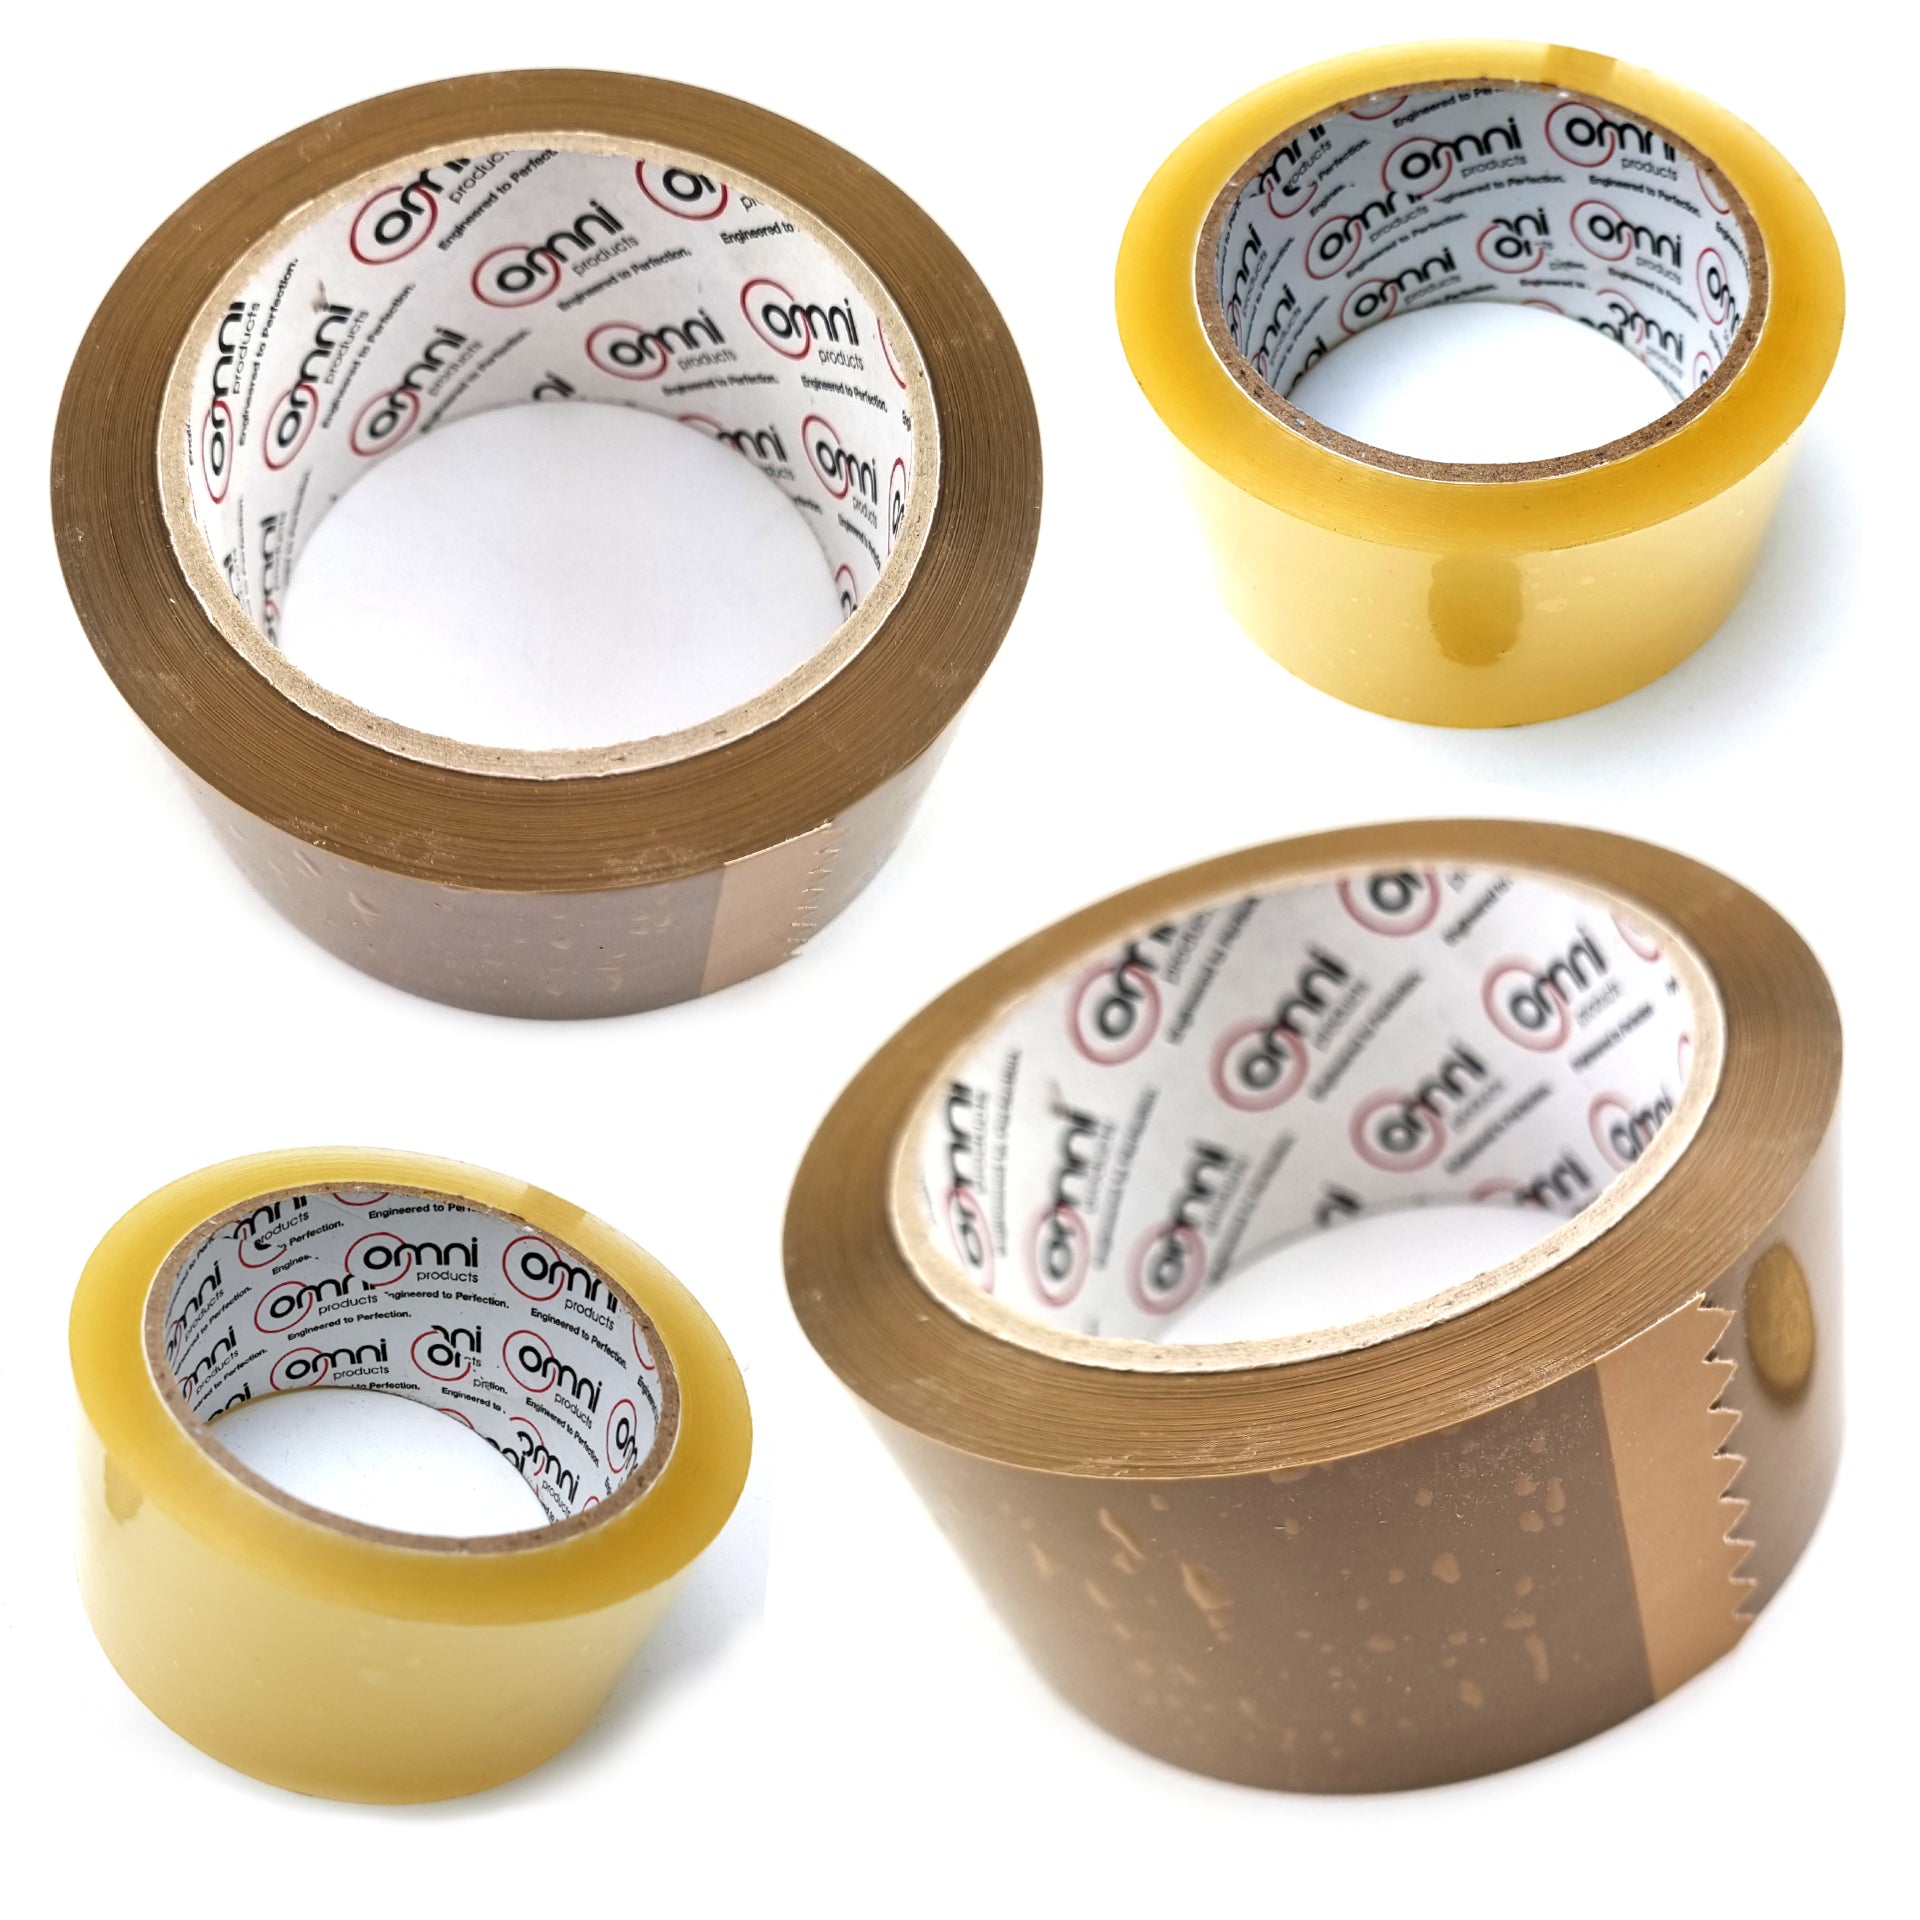 Bulk buy brown or clear sticky tape in a box of 12. Shop hardware online chain.com.au